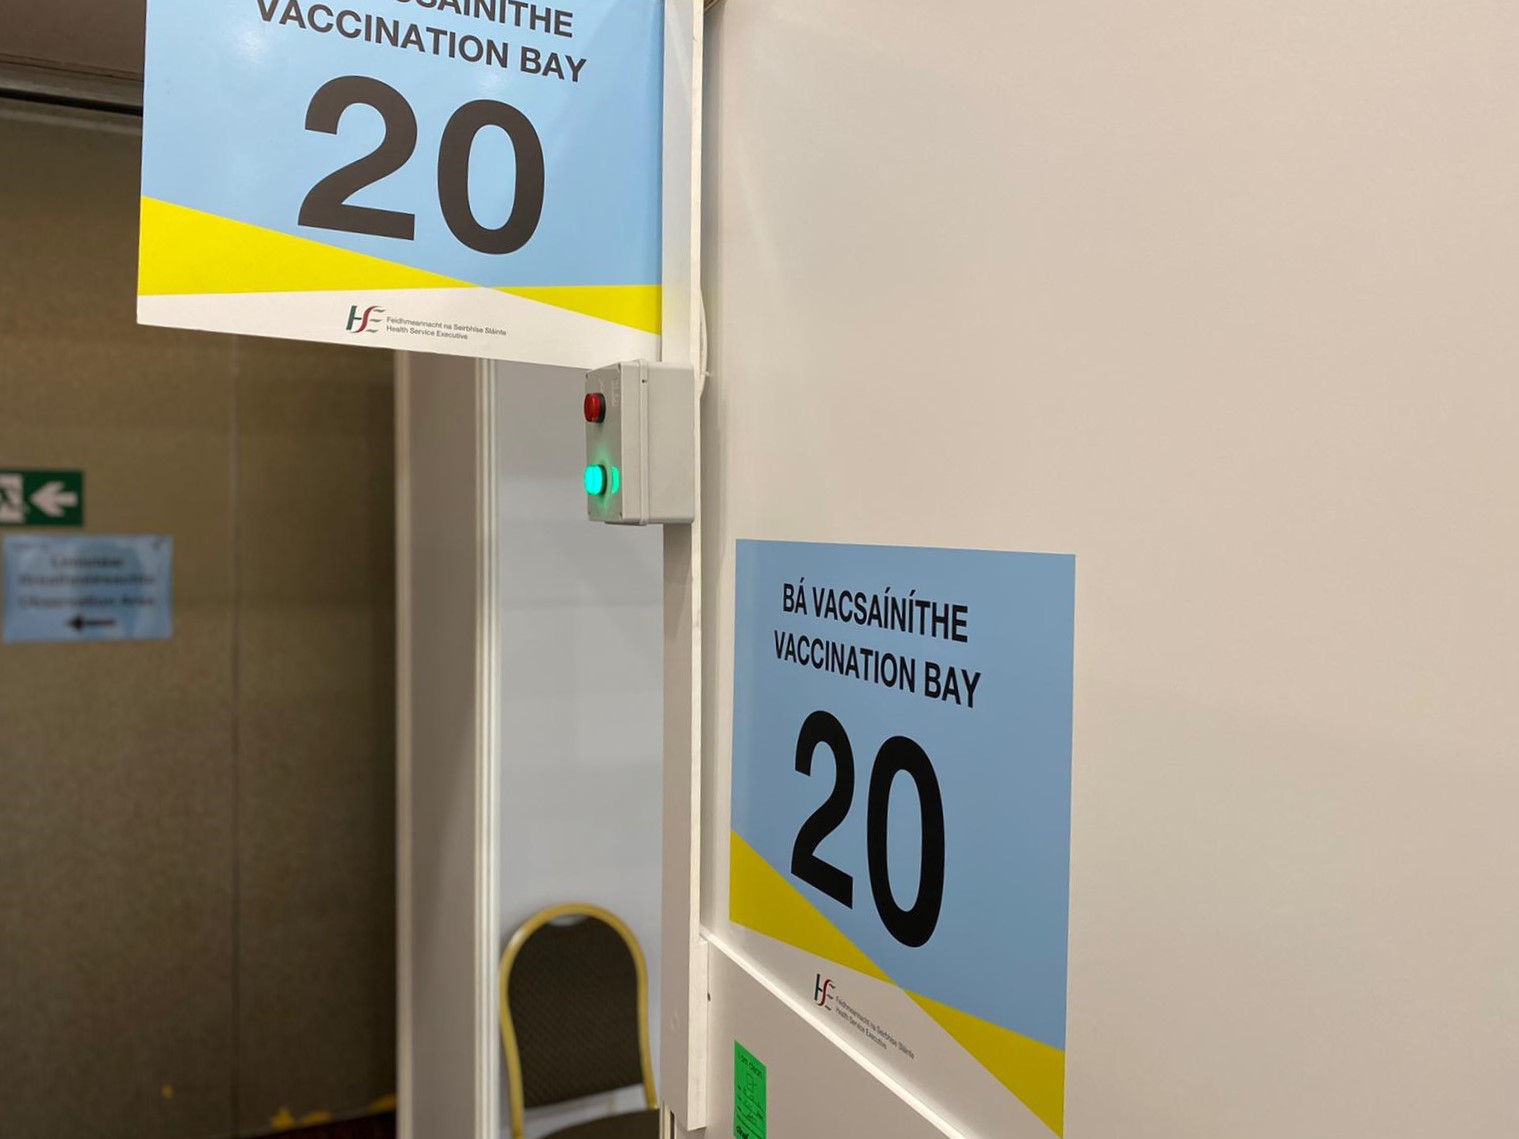 Drop in incidence of COVID-19 in Clare as vaccination centre relocates - Clare Echo - The Clare Echo